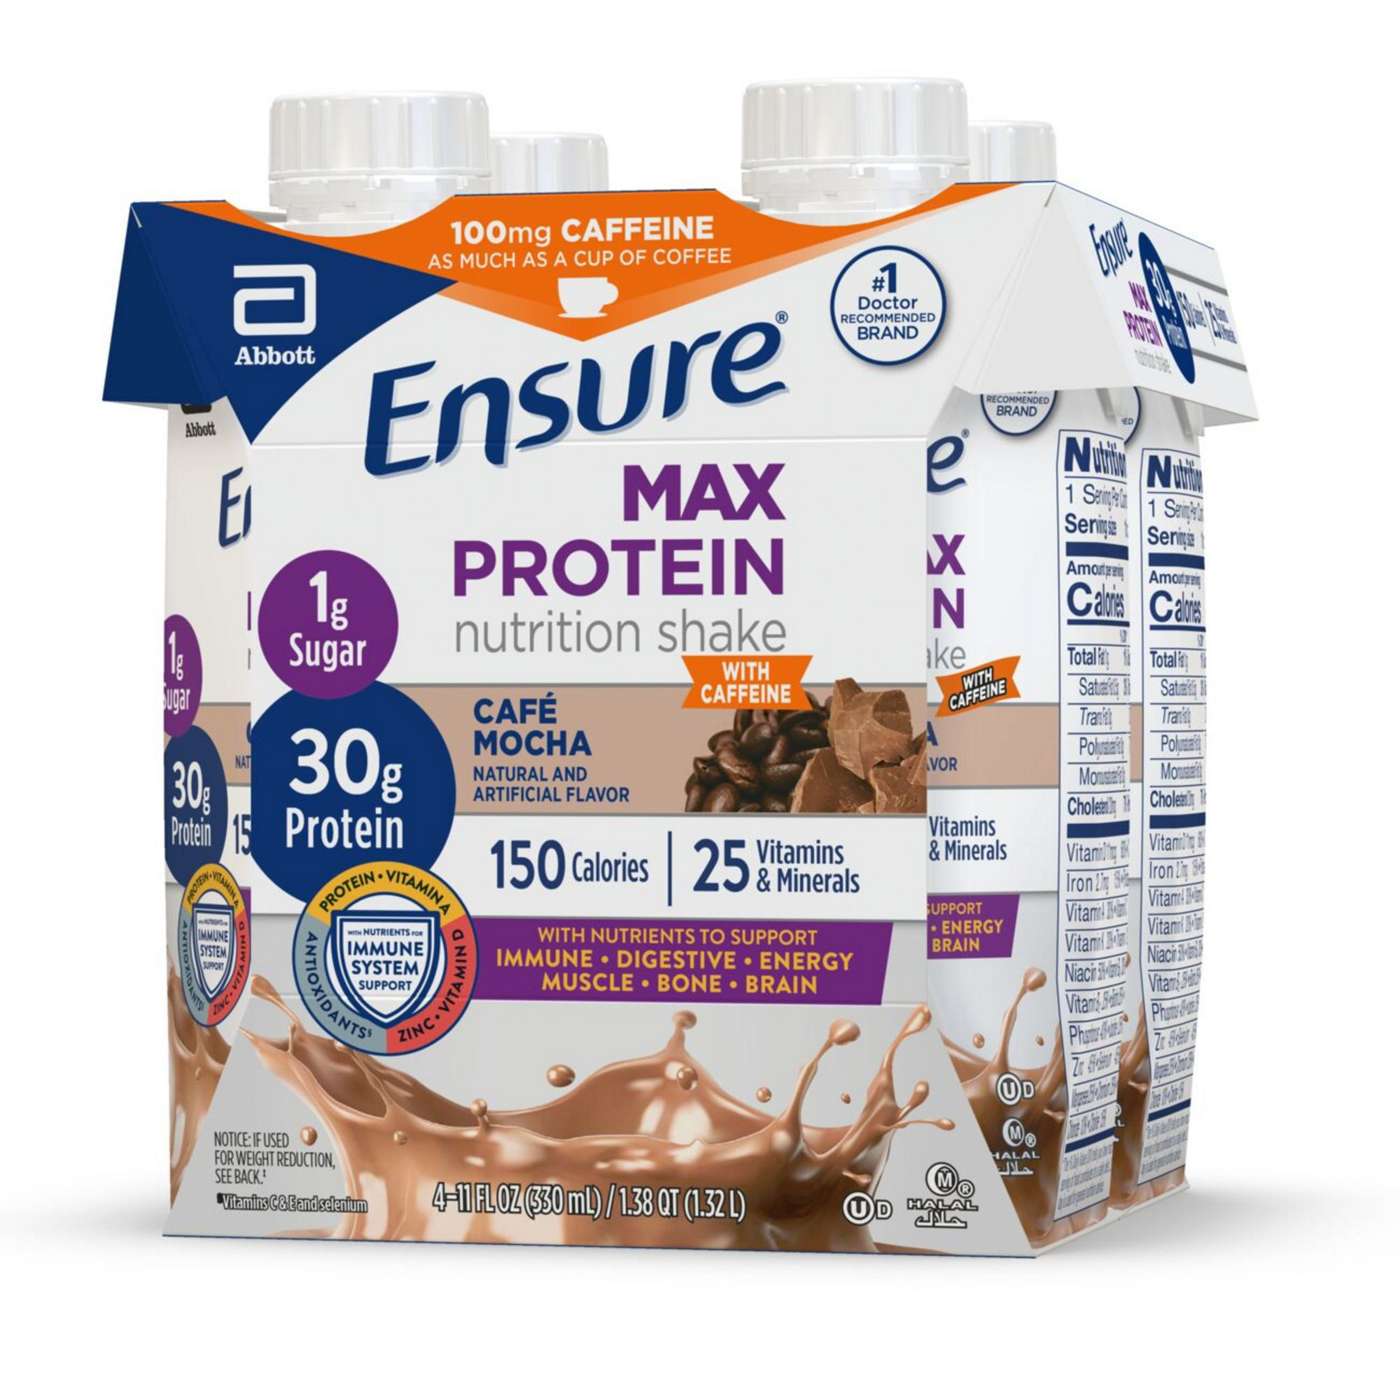 Ensure Max Protein Nutrition Shake Cafe Mocha 4 pk Ready-to-Drink; image 5 of 13